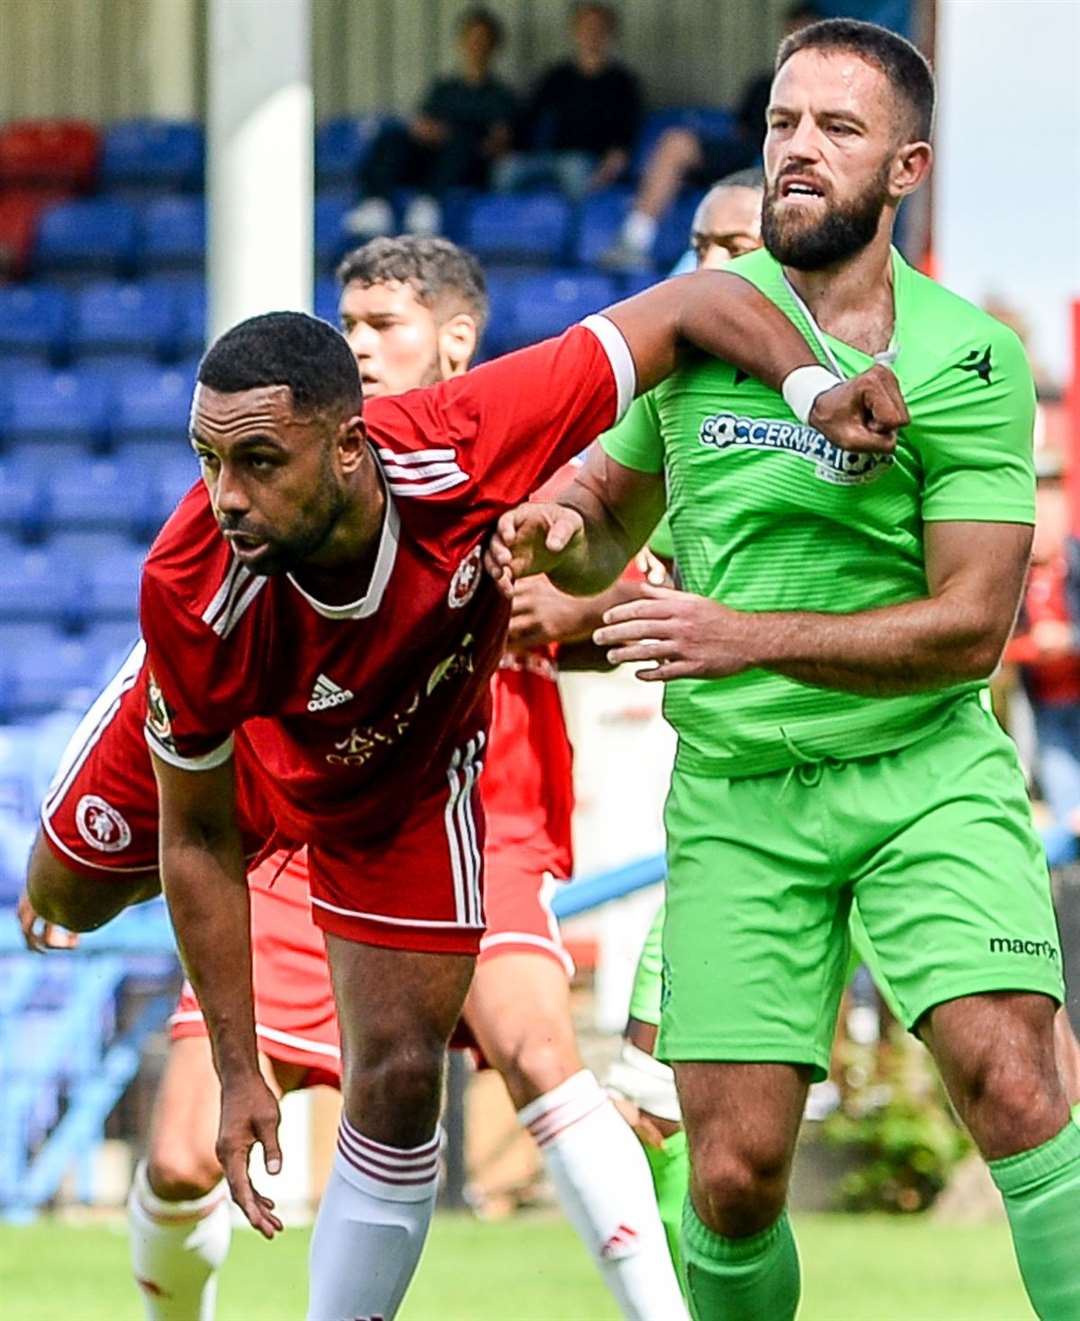 Welling's Adam Coombes is tightly marked by Oxford City. Picture: Dave Budden (15454672)